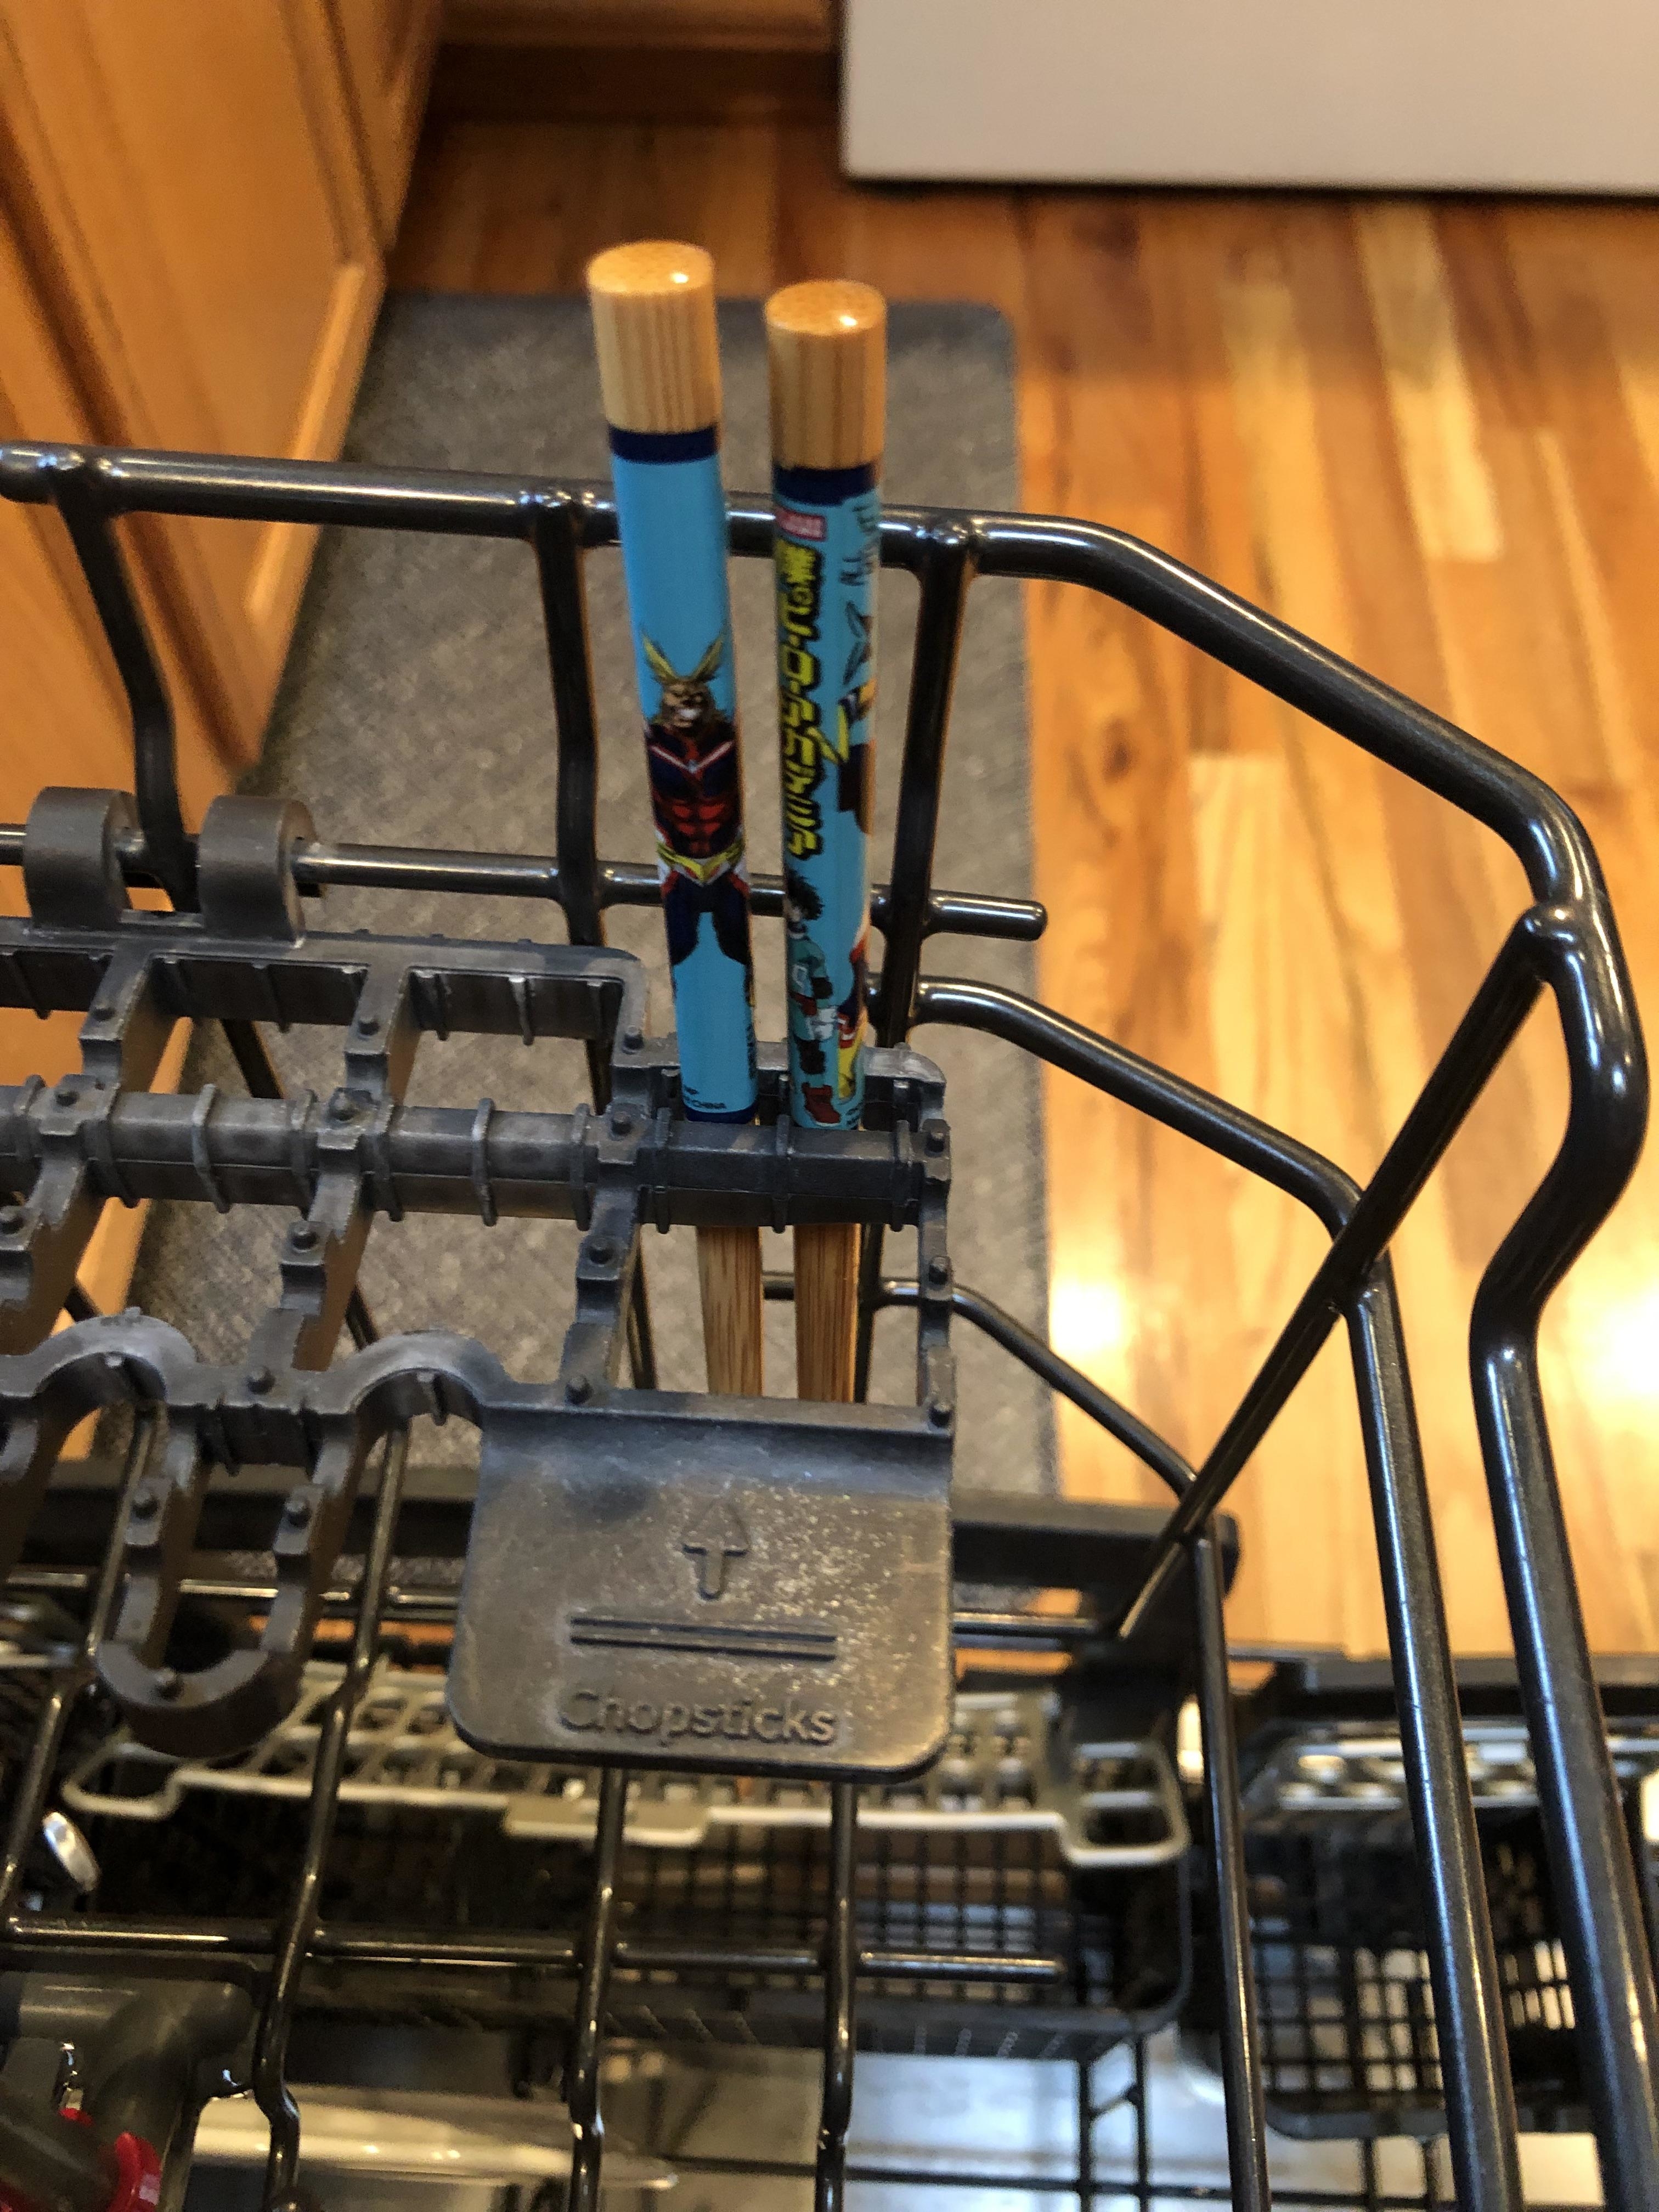 Two decorative chopsticks held upright in a dishwasher utensil rack for cleaning